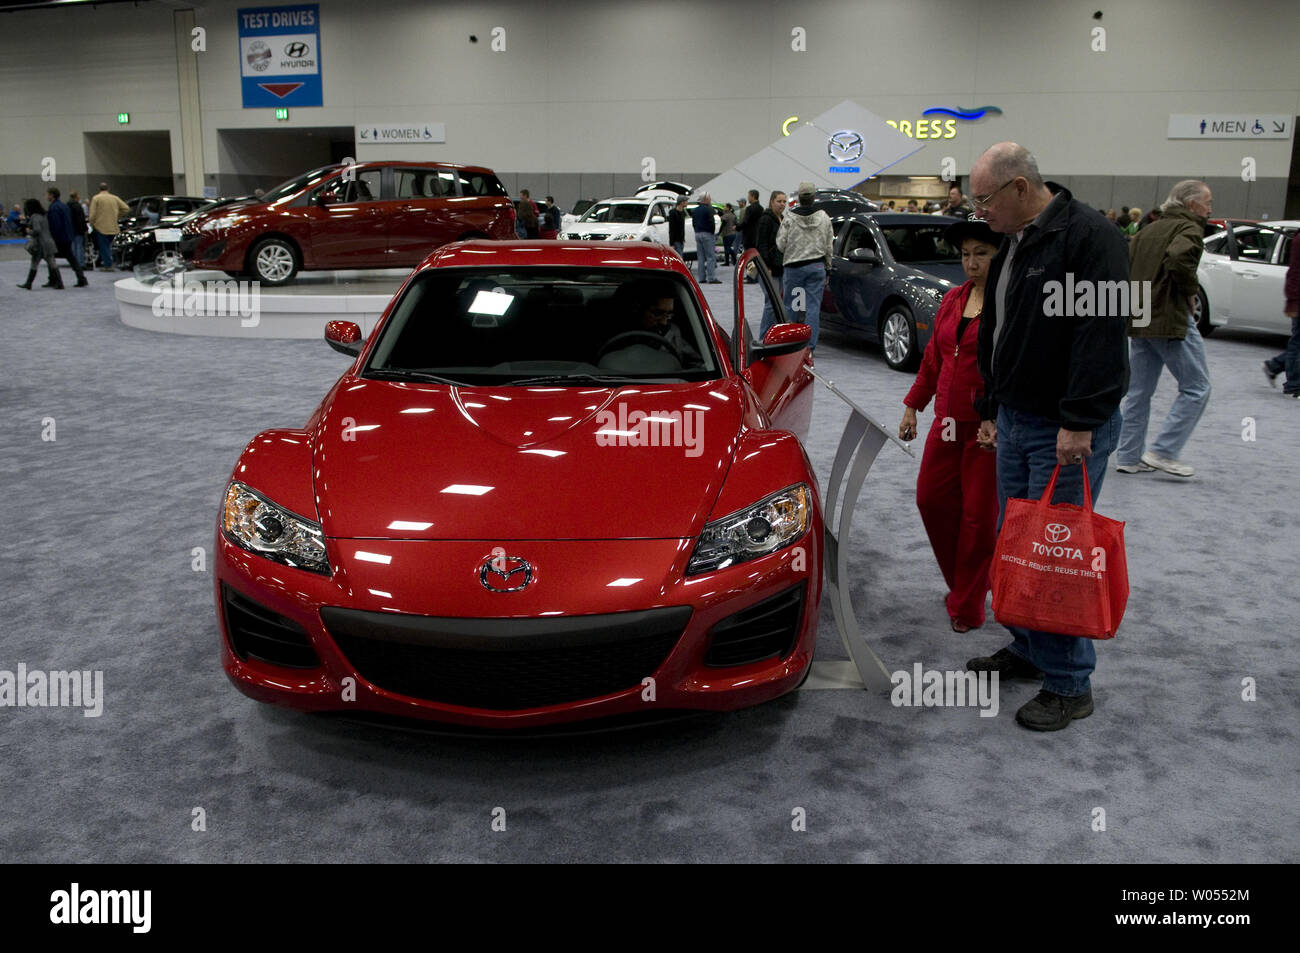 Visitors to the San Diego International Car Show look over a new 2011Mazda RX8, along with some of the over 400 2011 model vehicles on display at the San Diego Convention Center, December 30, 2010 .The auto show is expected to attract over three hundred thousand people and is the six largest in the country, showcasing concept cars and new releases from the top automakers. ( UPI Photo/Earl S. Cryer) Stock Photo